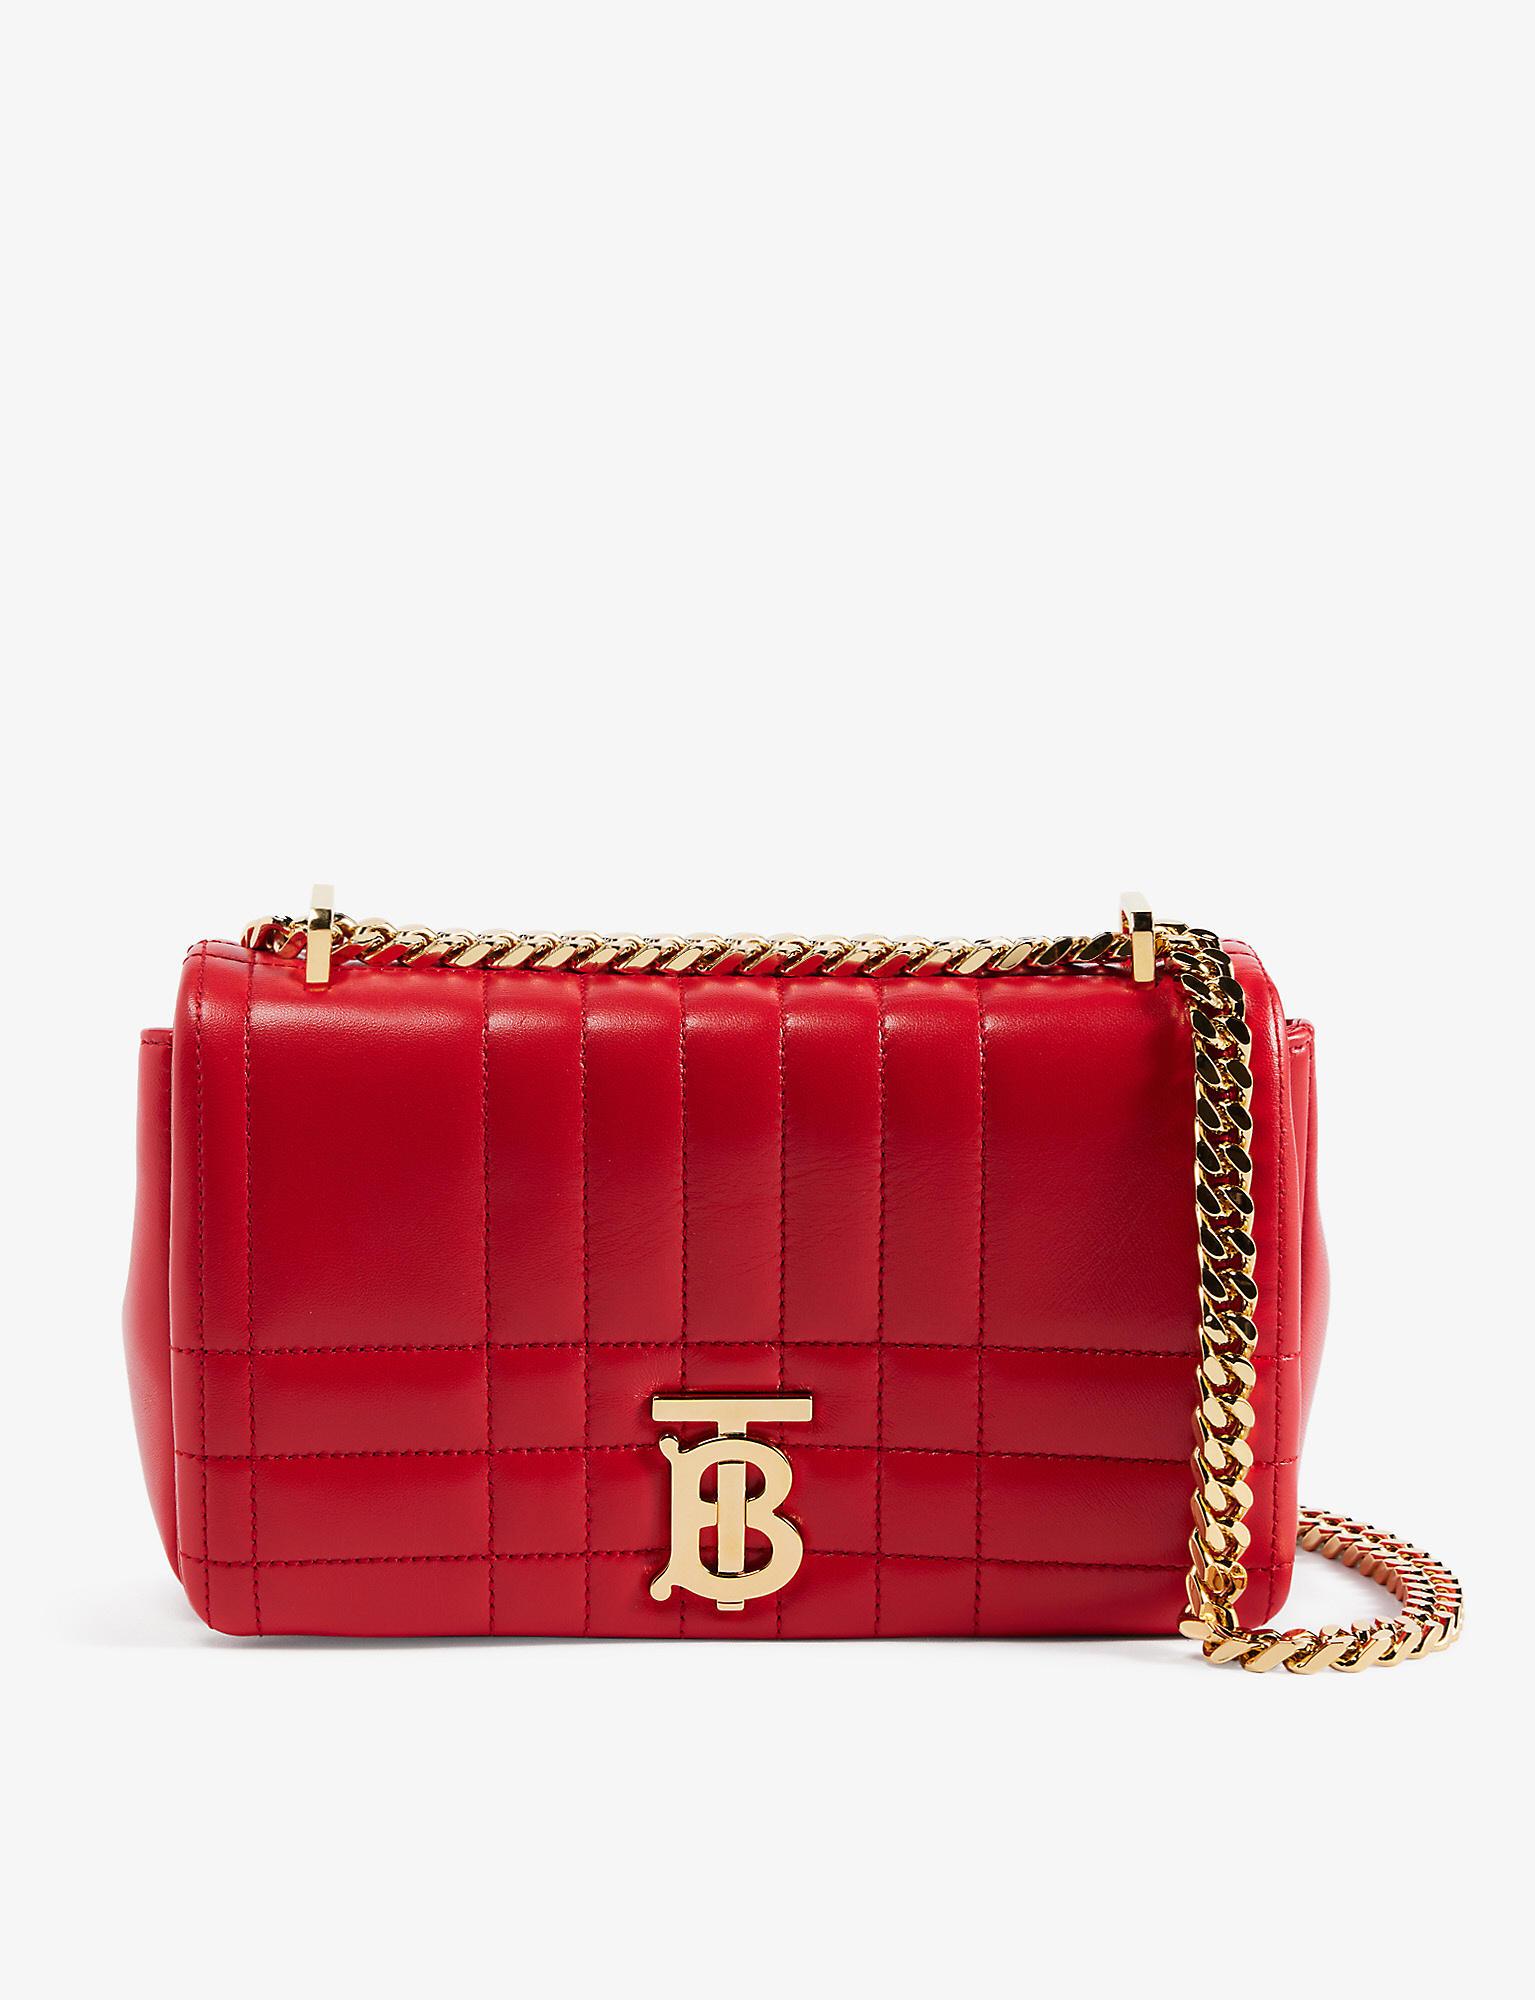 Burberry Lola Brand-plaque Leather Cross-body Bag in Bright Red (Red ...